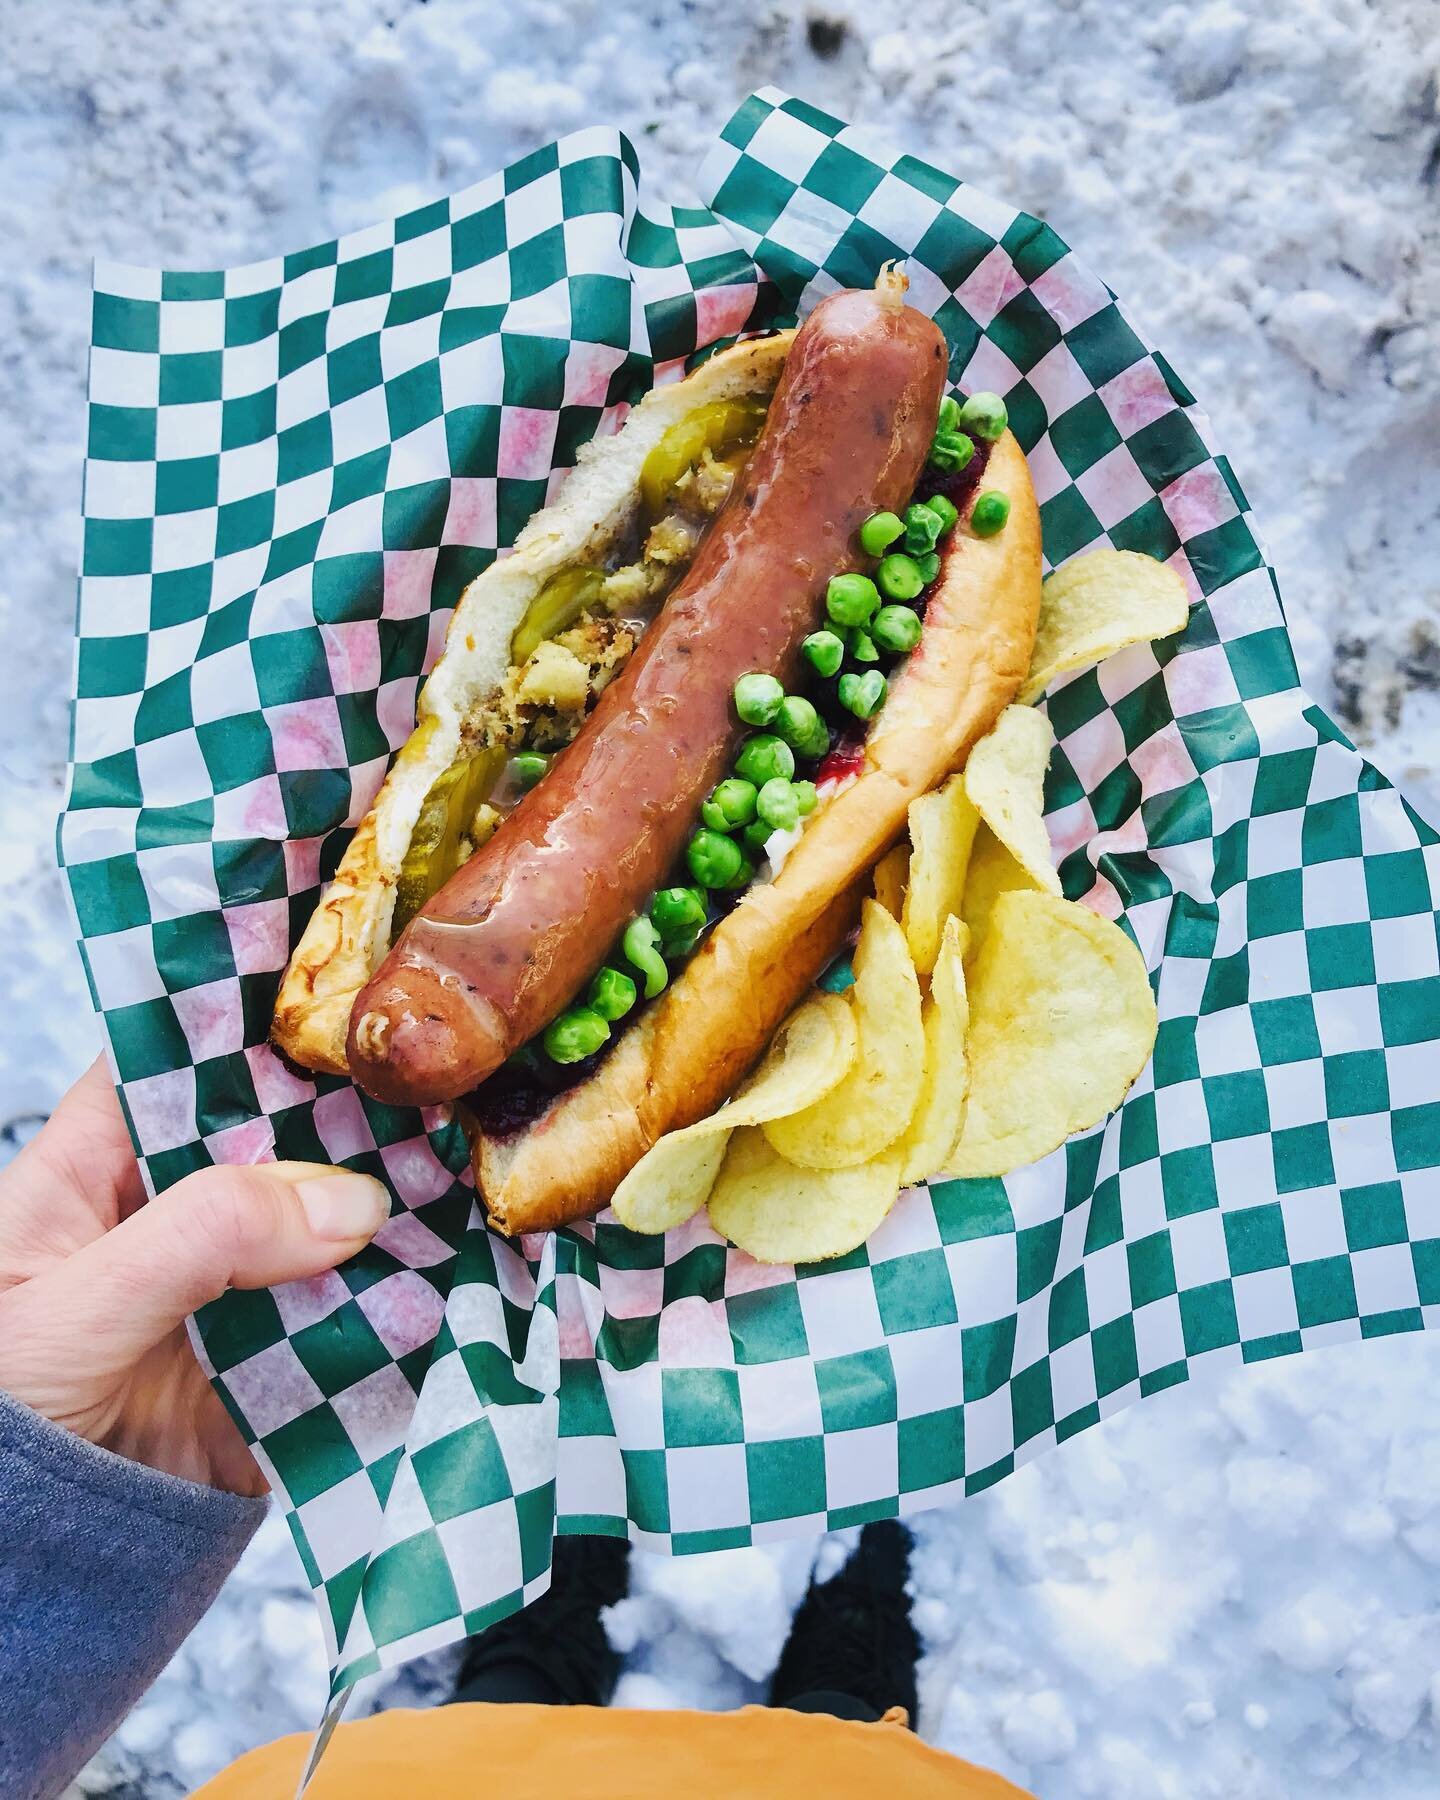 🎄The Christmas Dinner Dog🎄

Our December feature wiener is a Famous Fritz turkey smokie topped with all the festive fixing&rsquo;s! - cranberry sauce, stuffing, green peas, turkey gravy, bread n&rsquo; butter pickles, and grainy mustard. Served on 